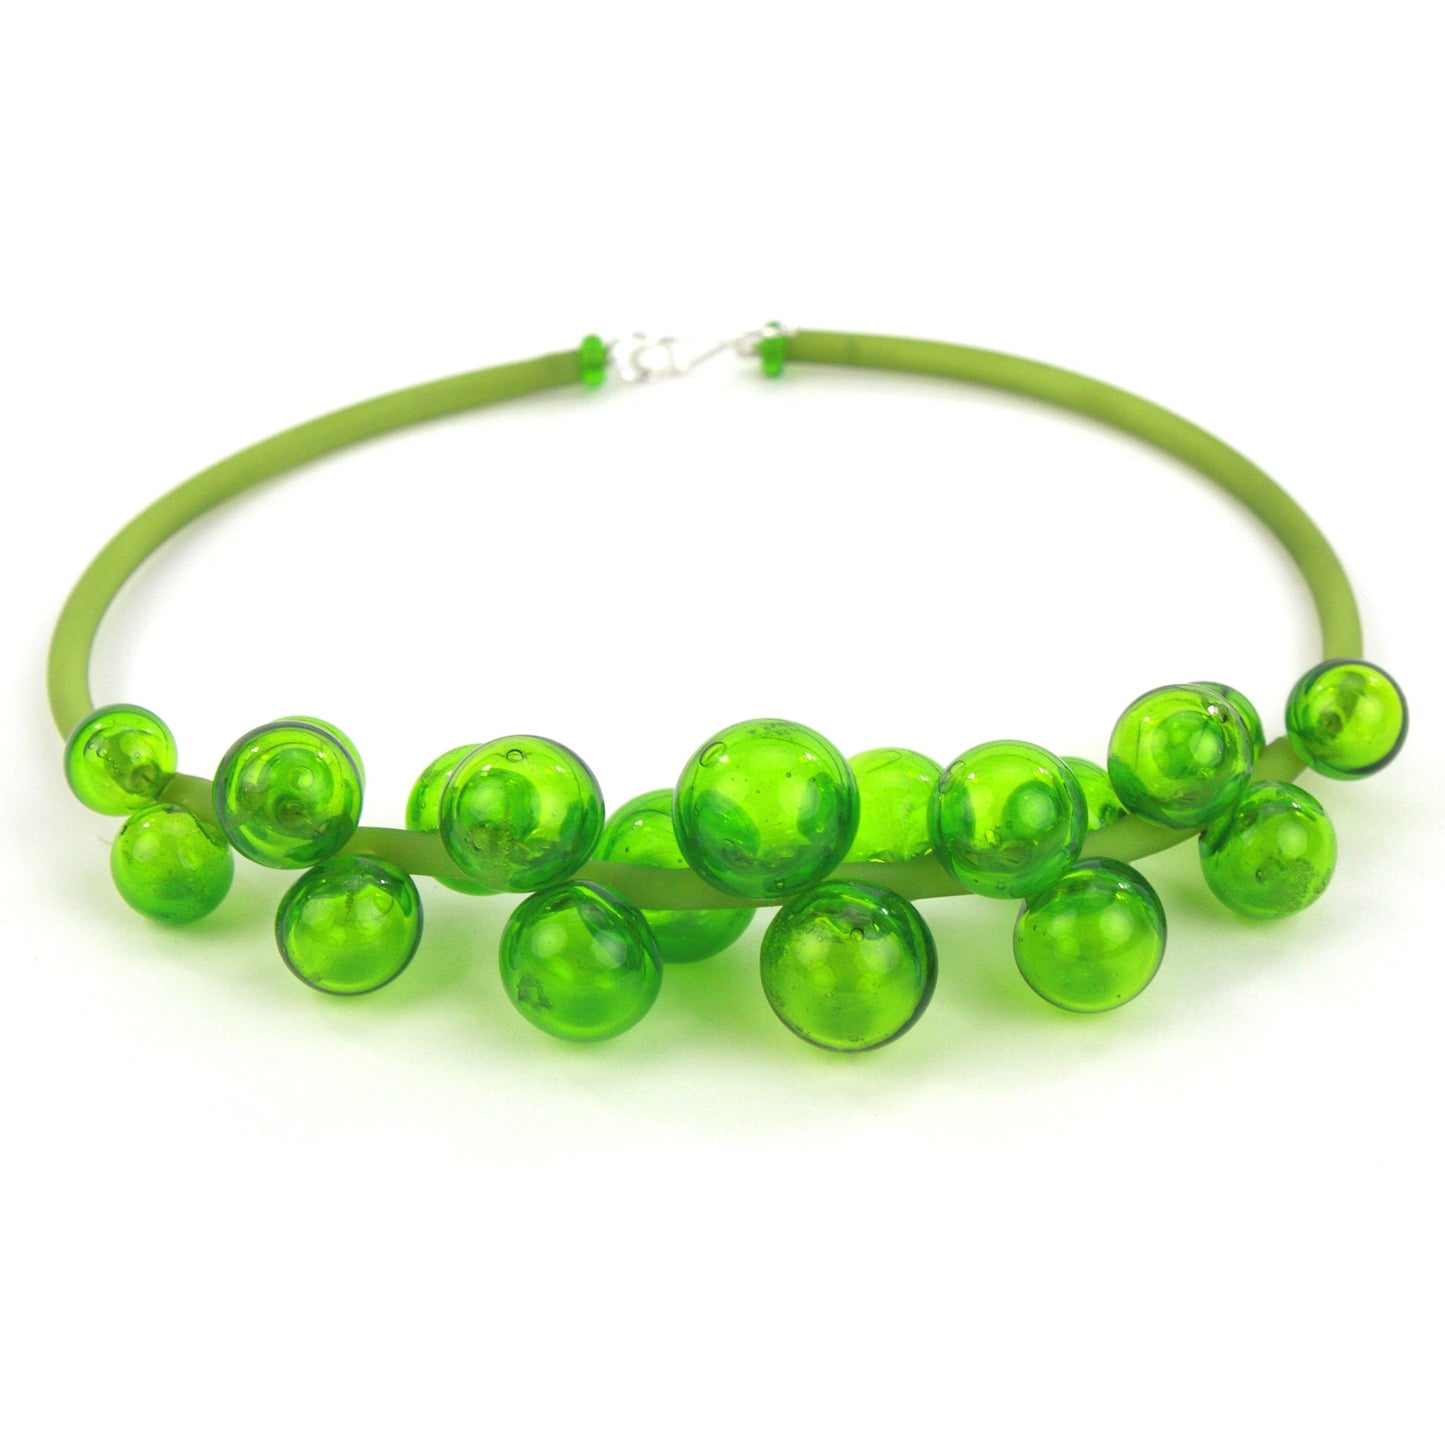 Chroma Bolla Necklace in Green